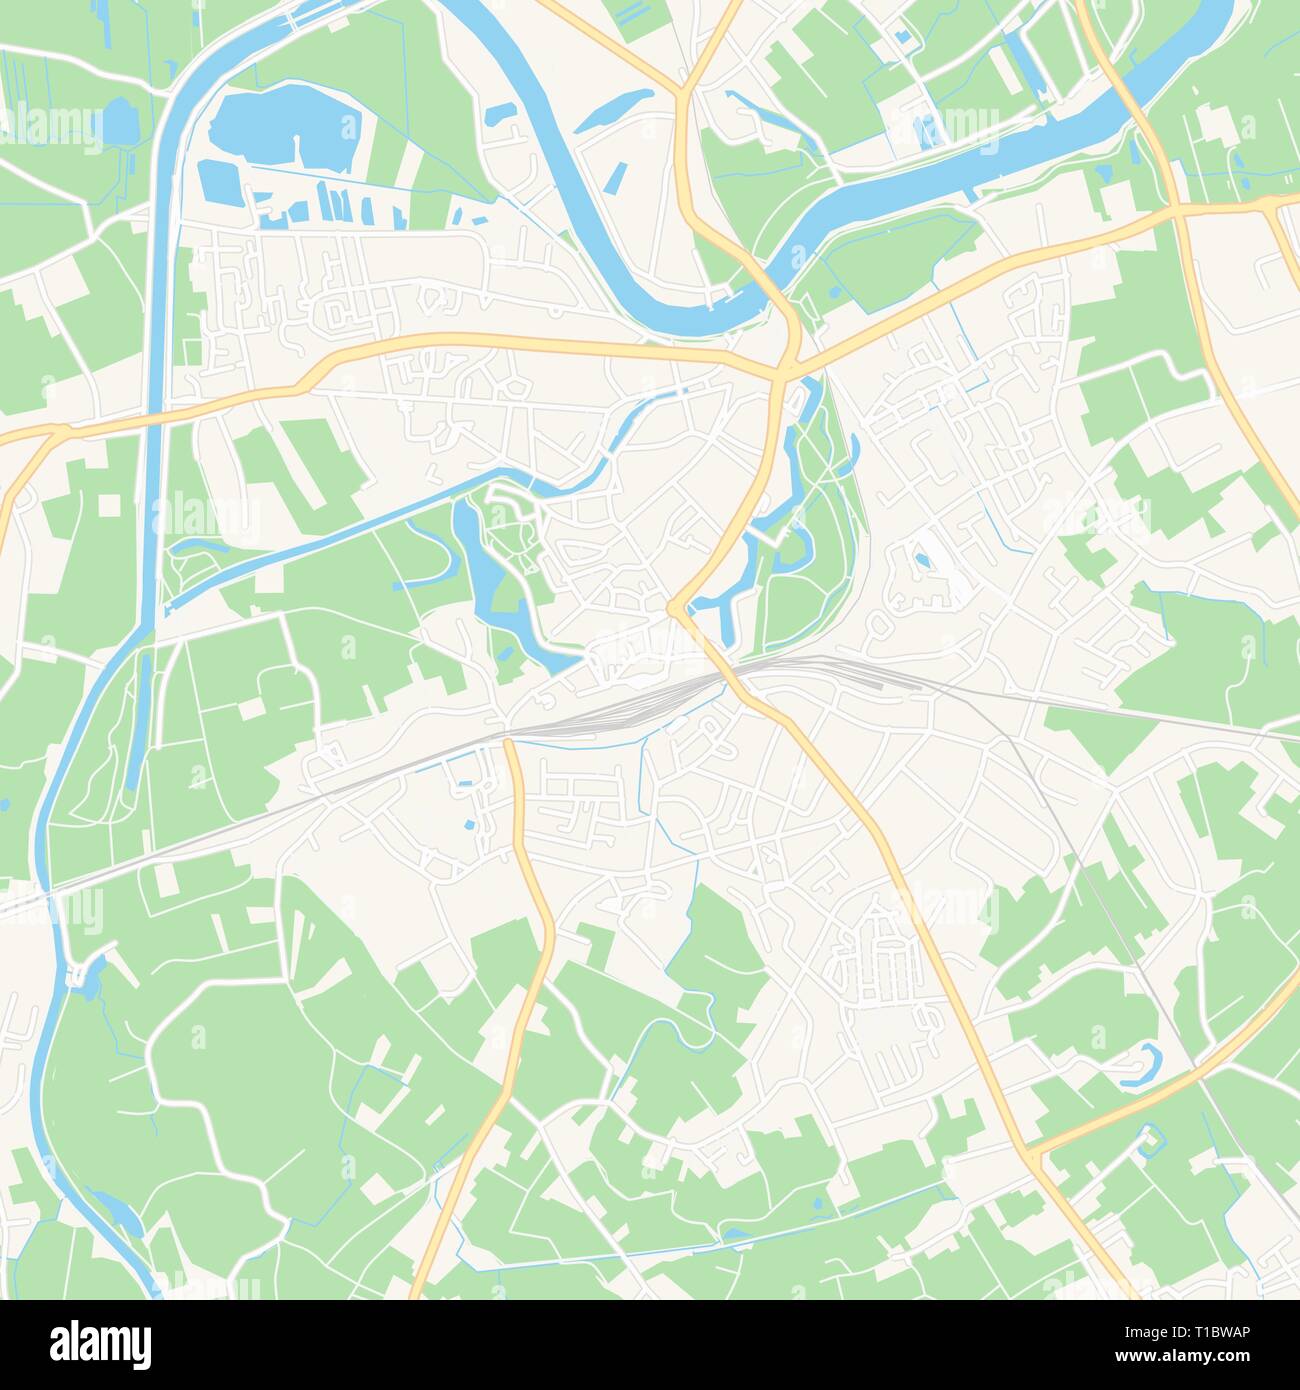 Printable map of Dendermonde , Belgium with main and secondary roads and larger railways. This map is carefully designed for routing and placing indiv Stock Vector